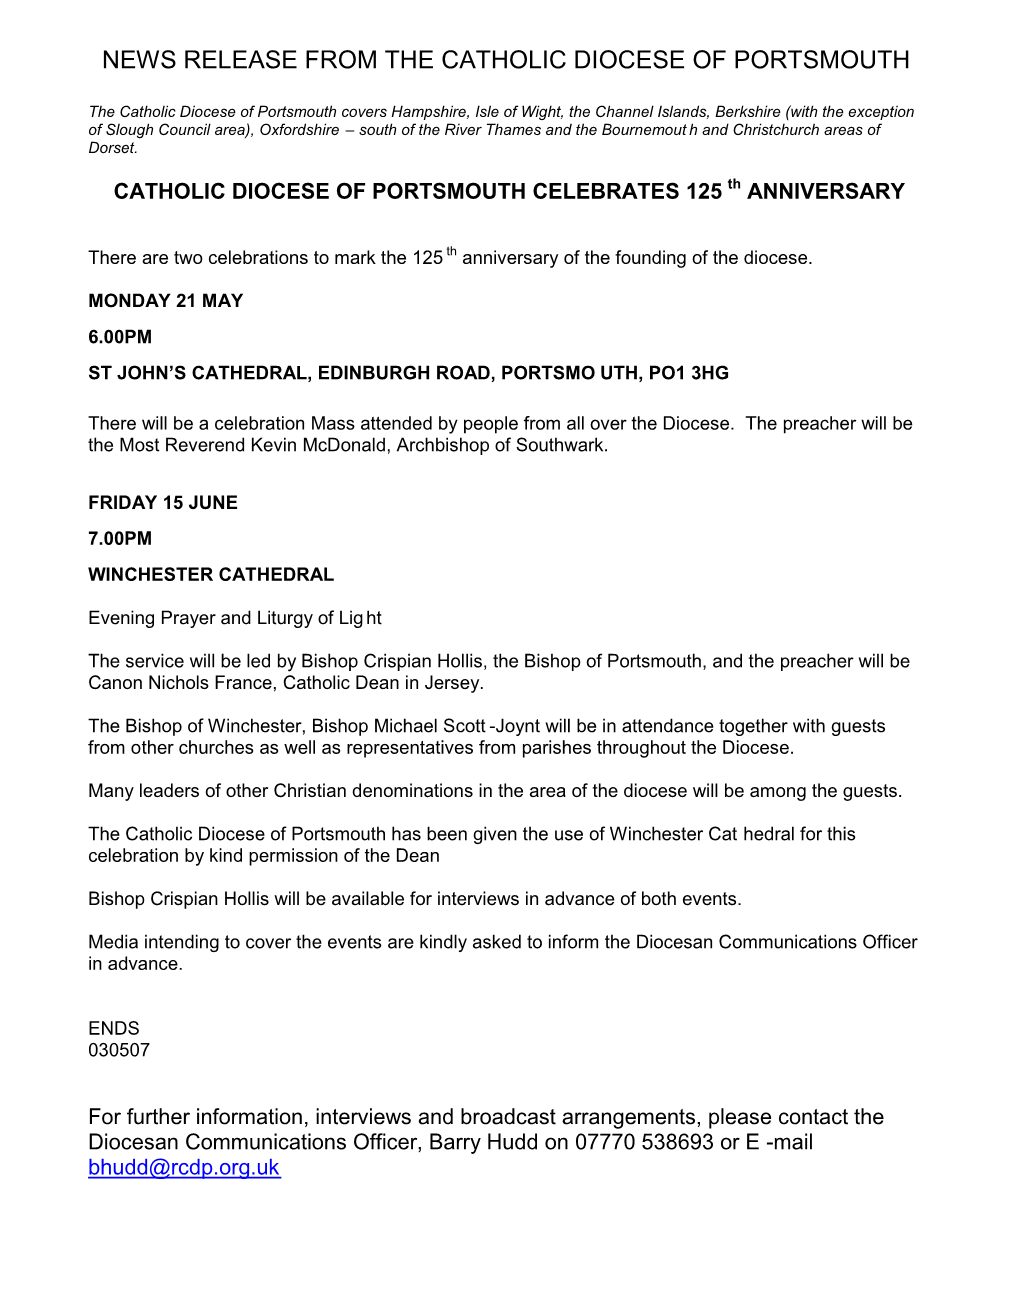 News Release from the Catholic Diocese of Portsmouth